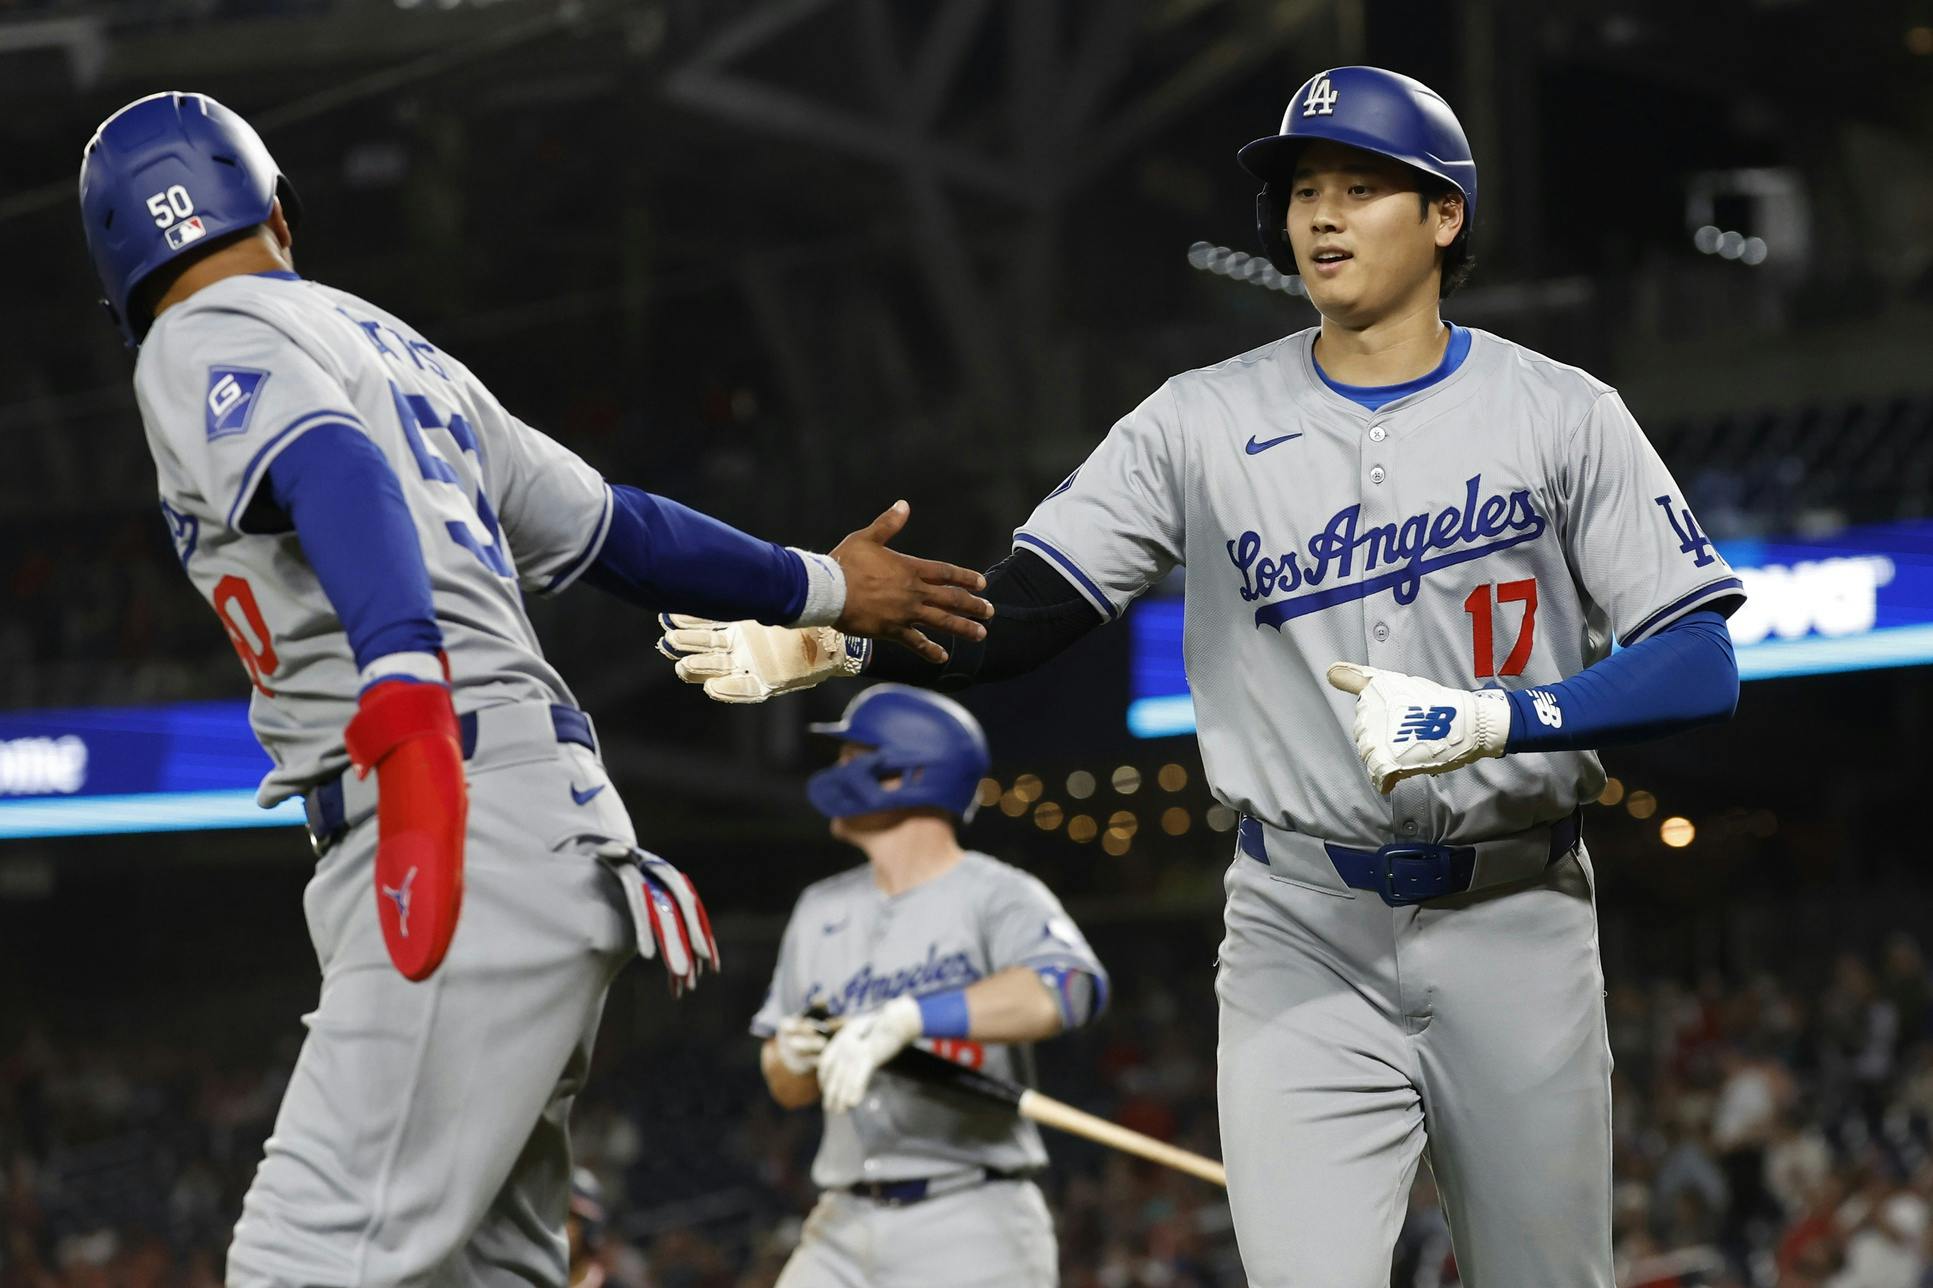 Los Angeles Dodgers shortstop Mookie Betts (50) and Dodgers designated hitter Shohei Ohtani (17) celebrate after scoring runs on a single by Dodgers first baseman Freddie Freeman (not pictured) against the Washington Nationals during the ninth inning at Nationals Park.